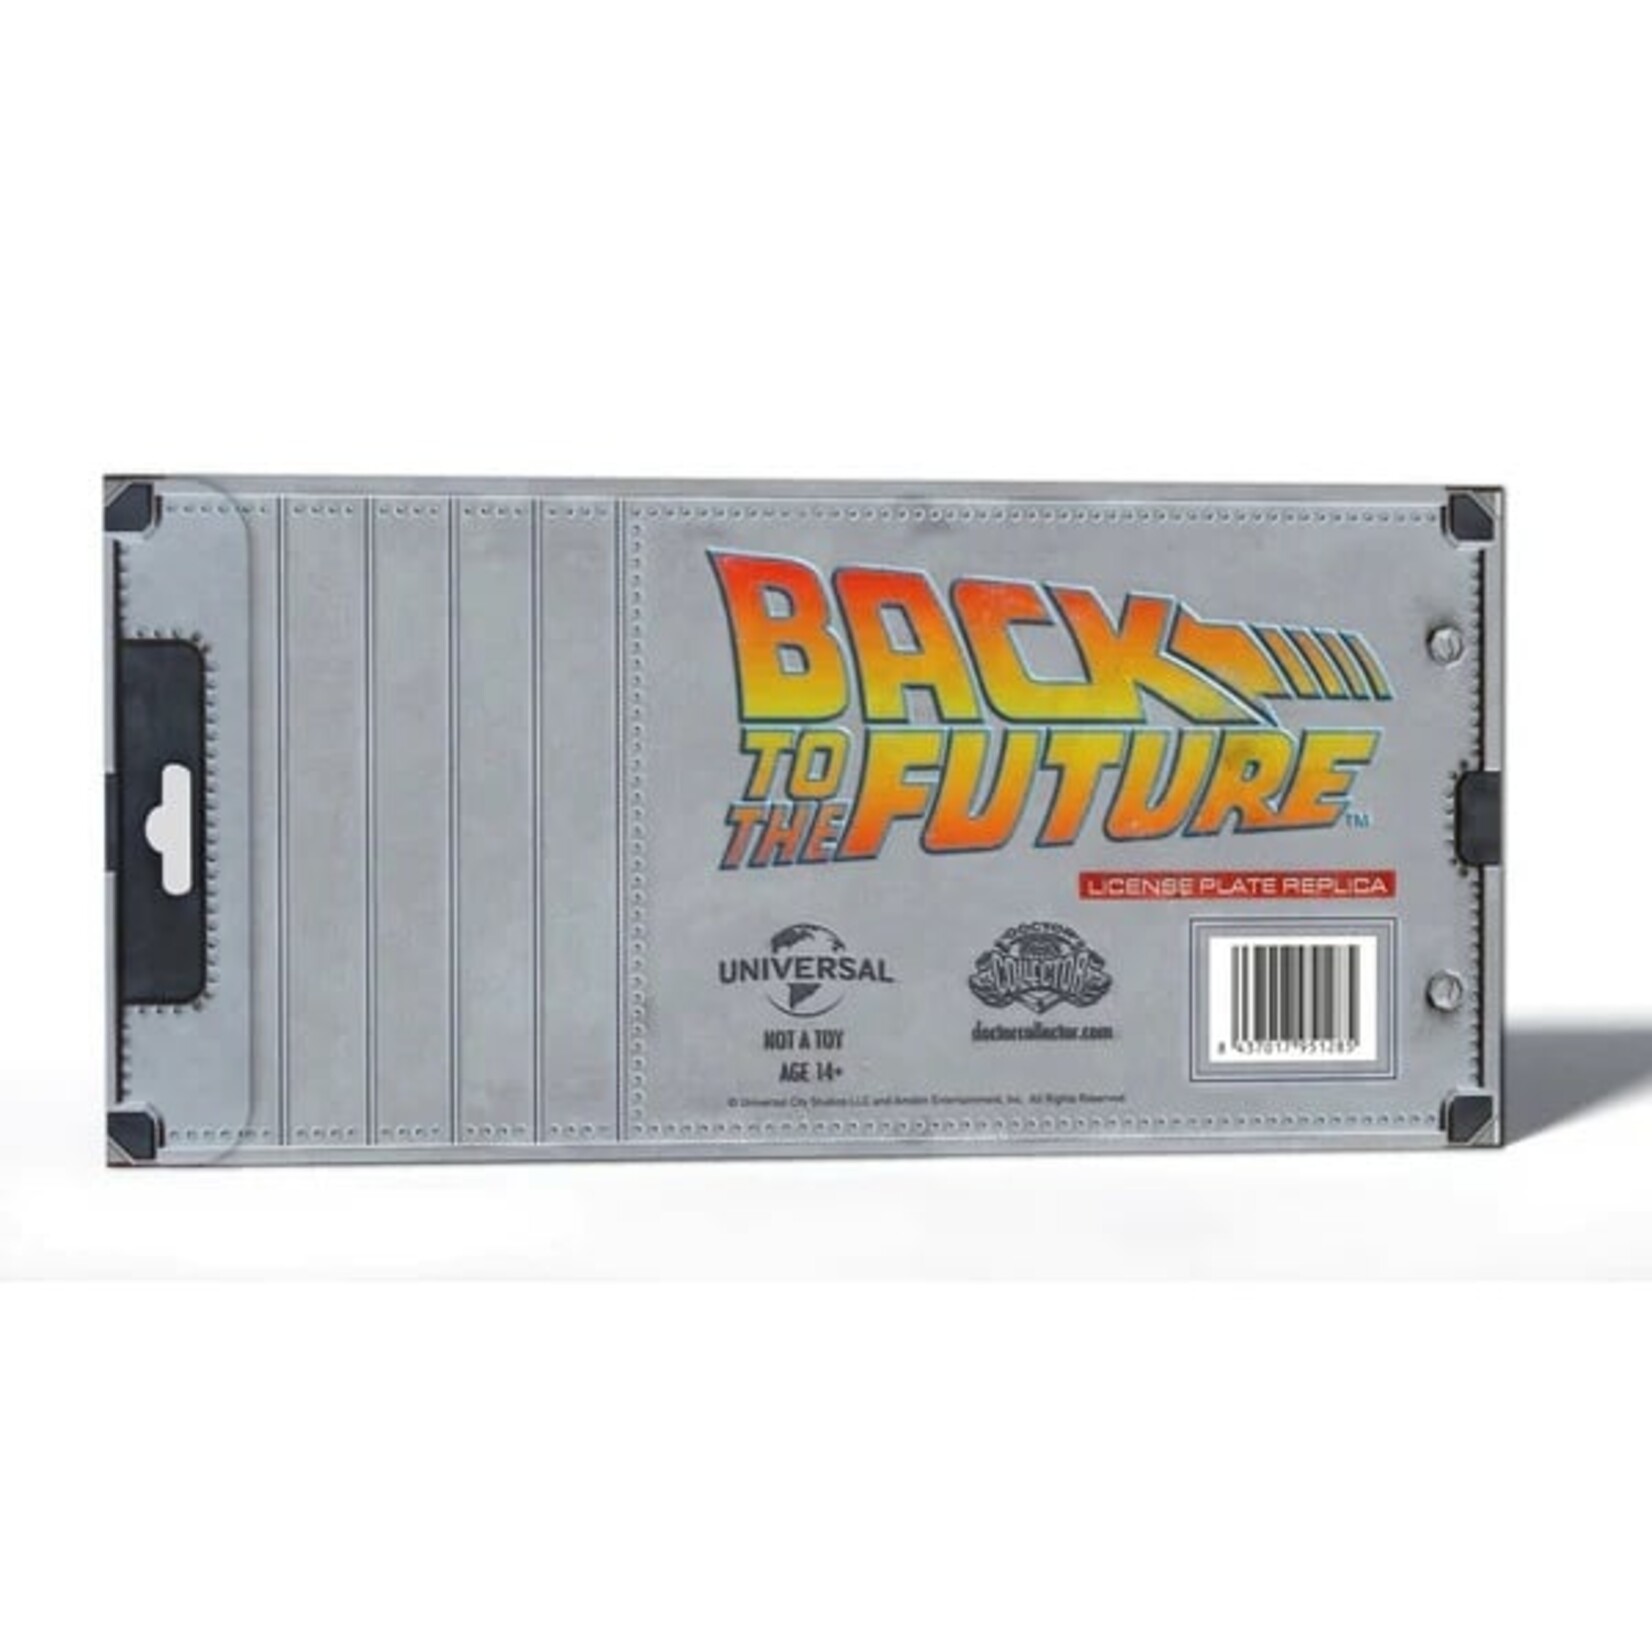 Doctor Collector Doctor Collector Back to the Future OUTATIME License Plate Replica